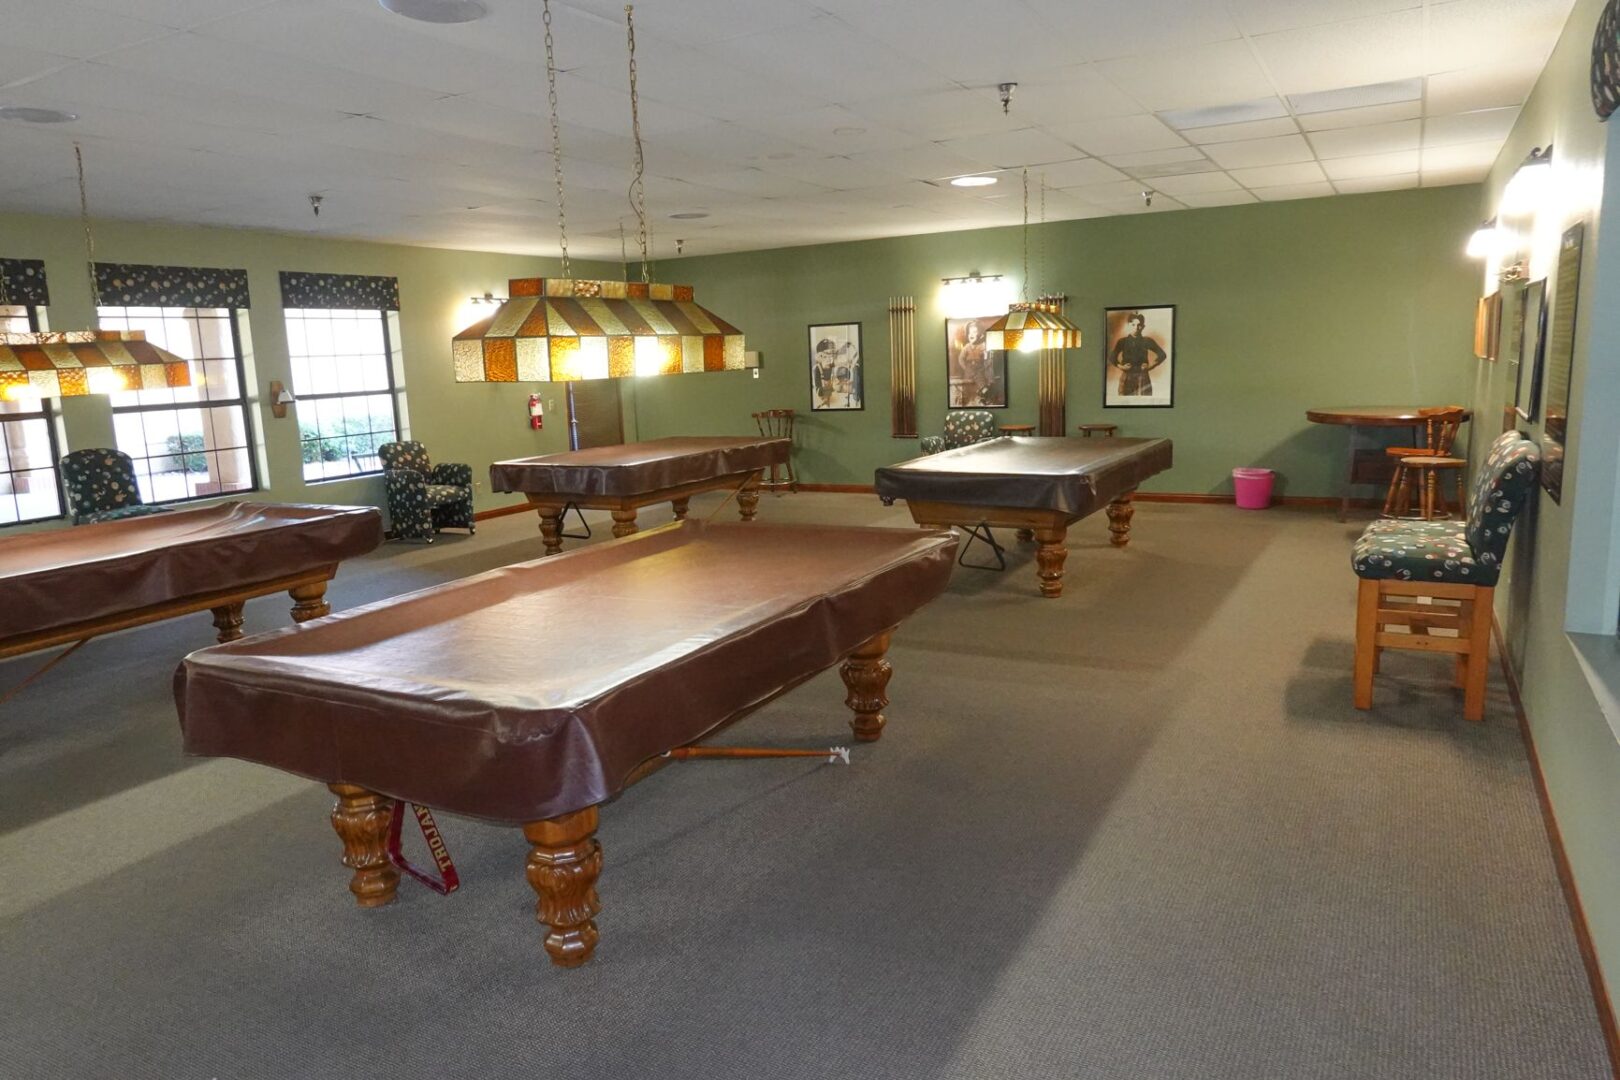 A room with pool tables and billiard tables.